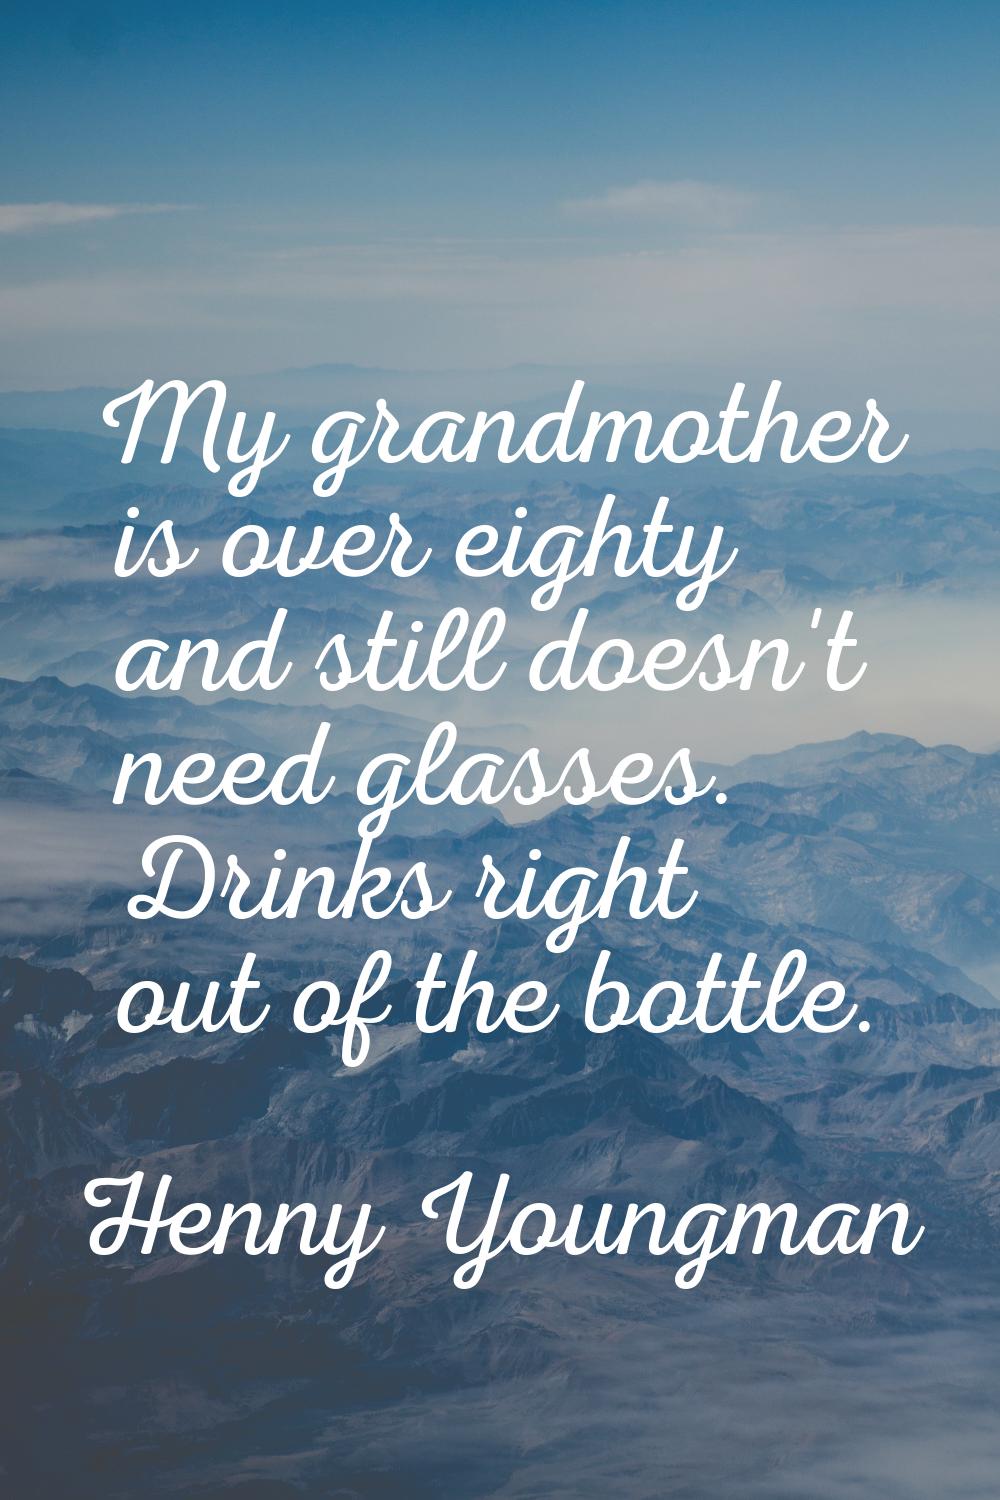 My grandmother is over eighty and still doesn't need glasses. Drinks right out of the bottle.